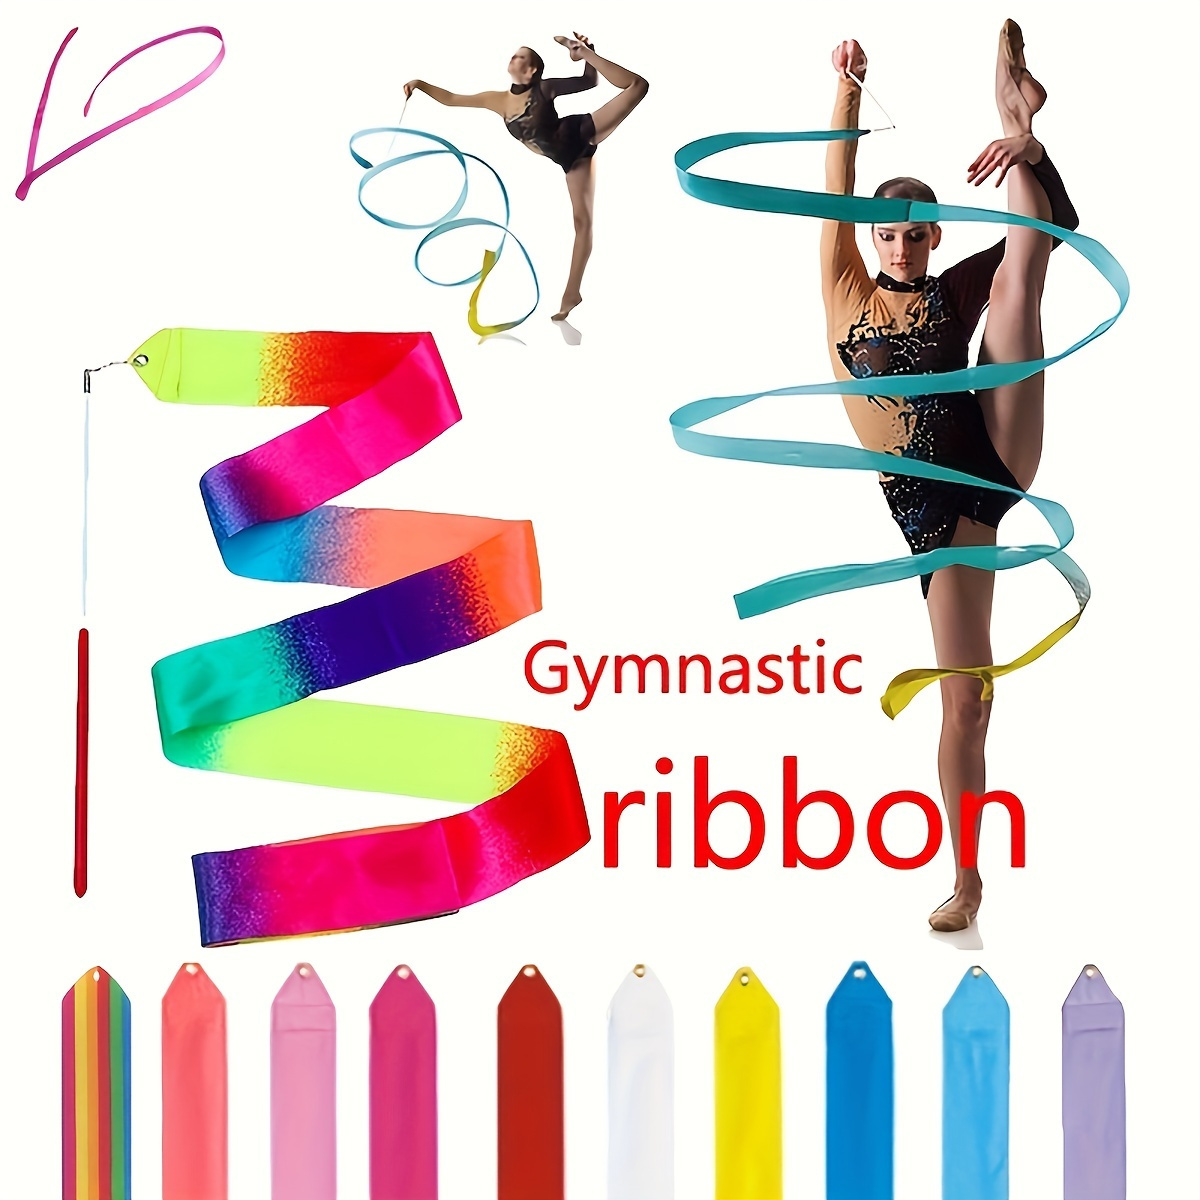  5 Pcs Gymnastics Gifts Gymnastics Drawstring Bag Gymnastics  Stuff Gymnastics Headband Girls Gymnastics Bracelet Gymnastics Necklace  Gymnastics Scrunchies Gymnast Party Favors for ages 6 and older : Sports &  Outdoors